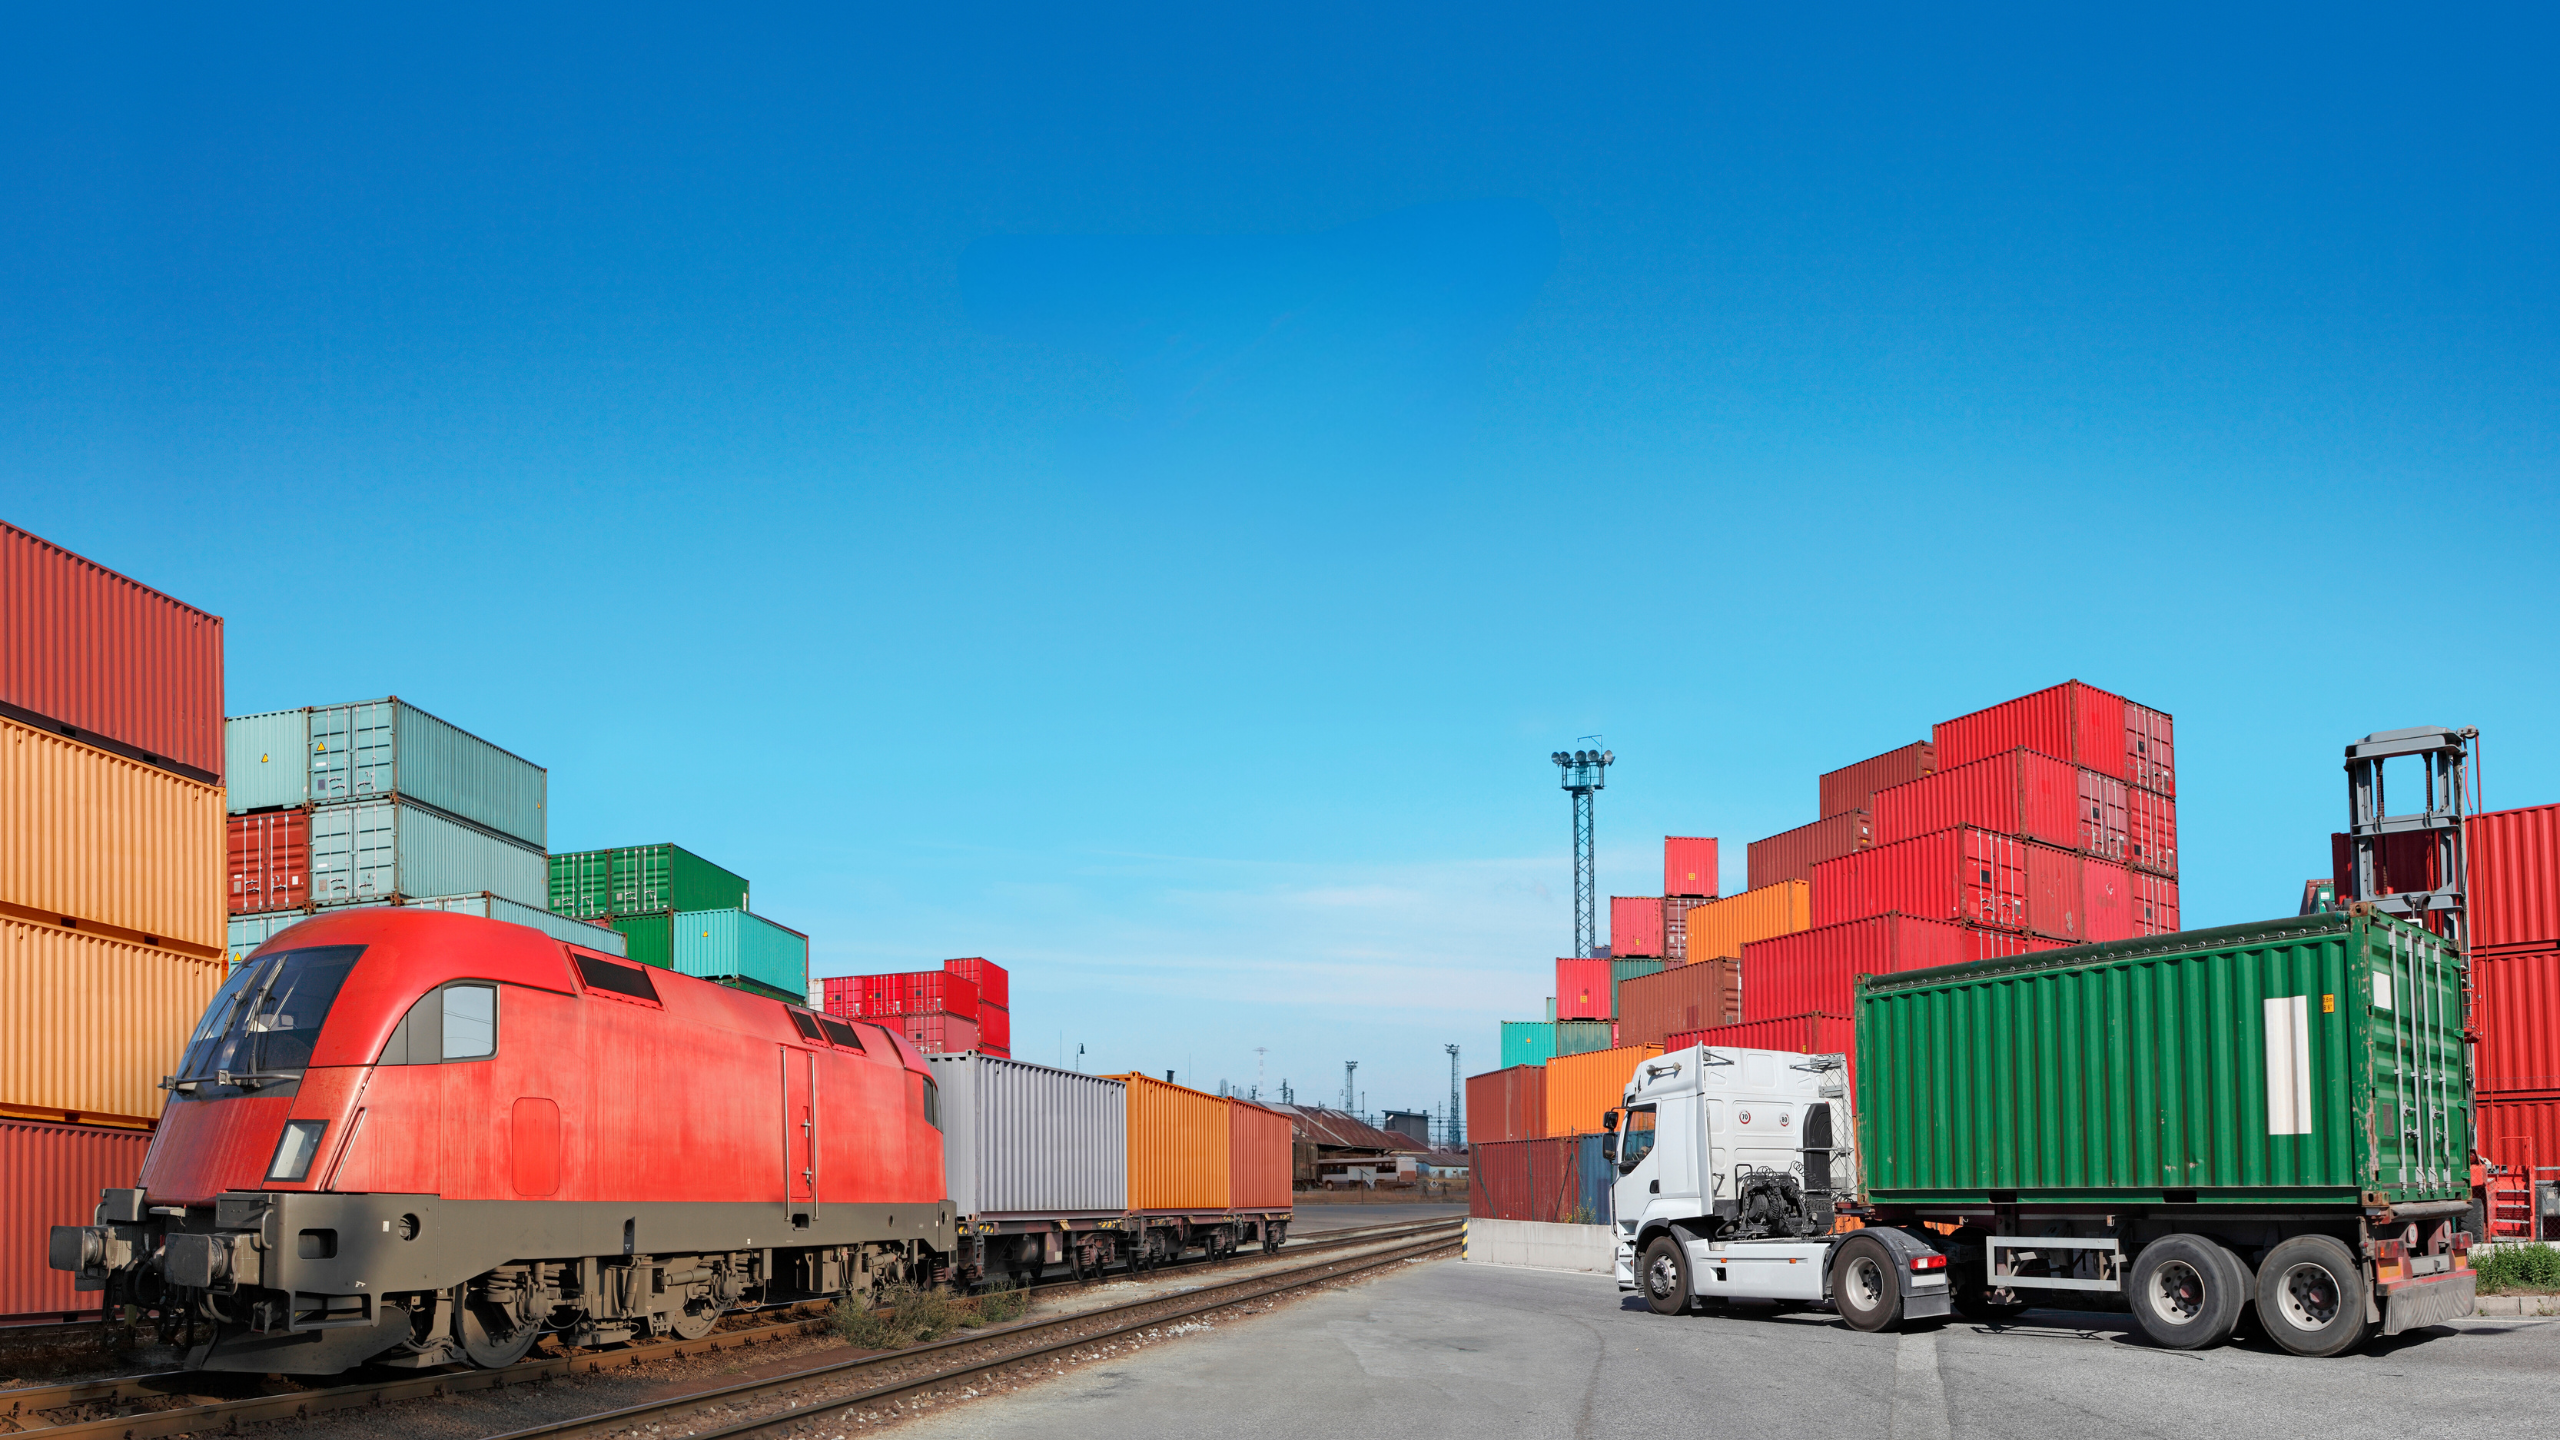 freight train and semi truck in a rail yard preparing for shipping